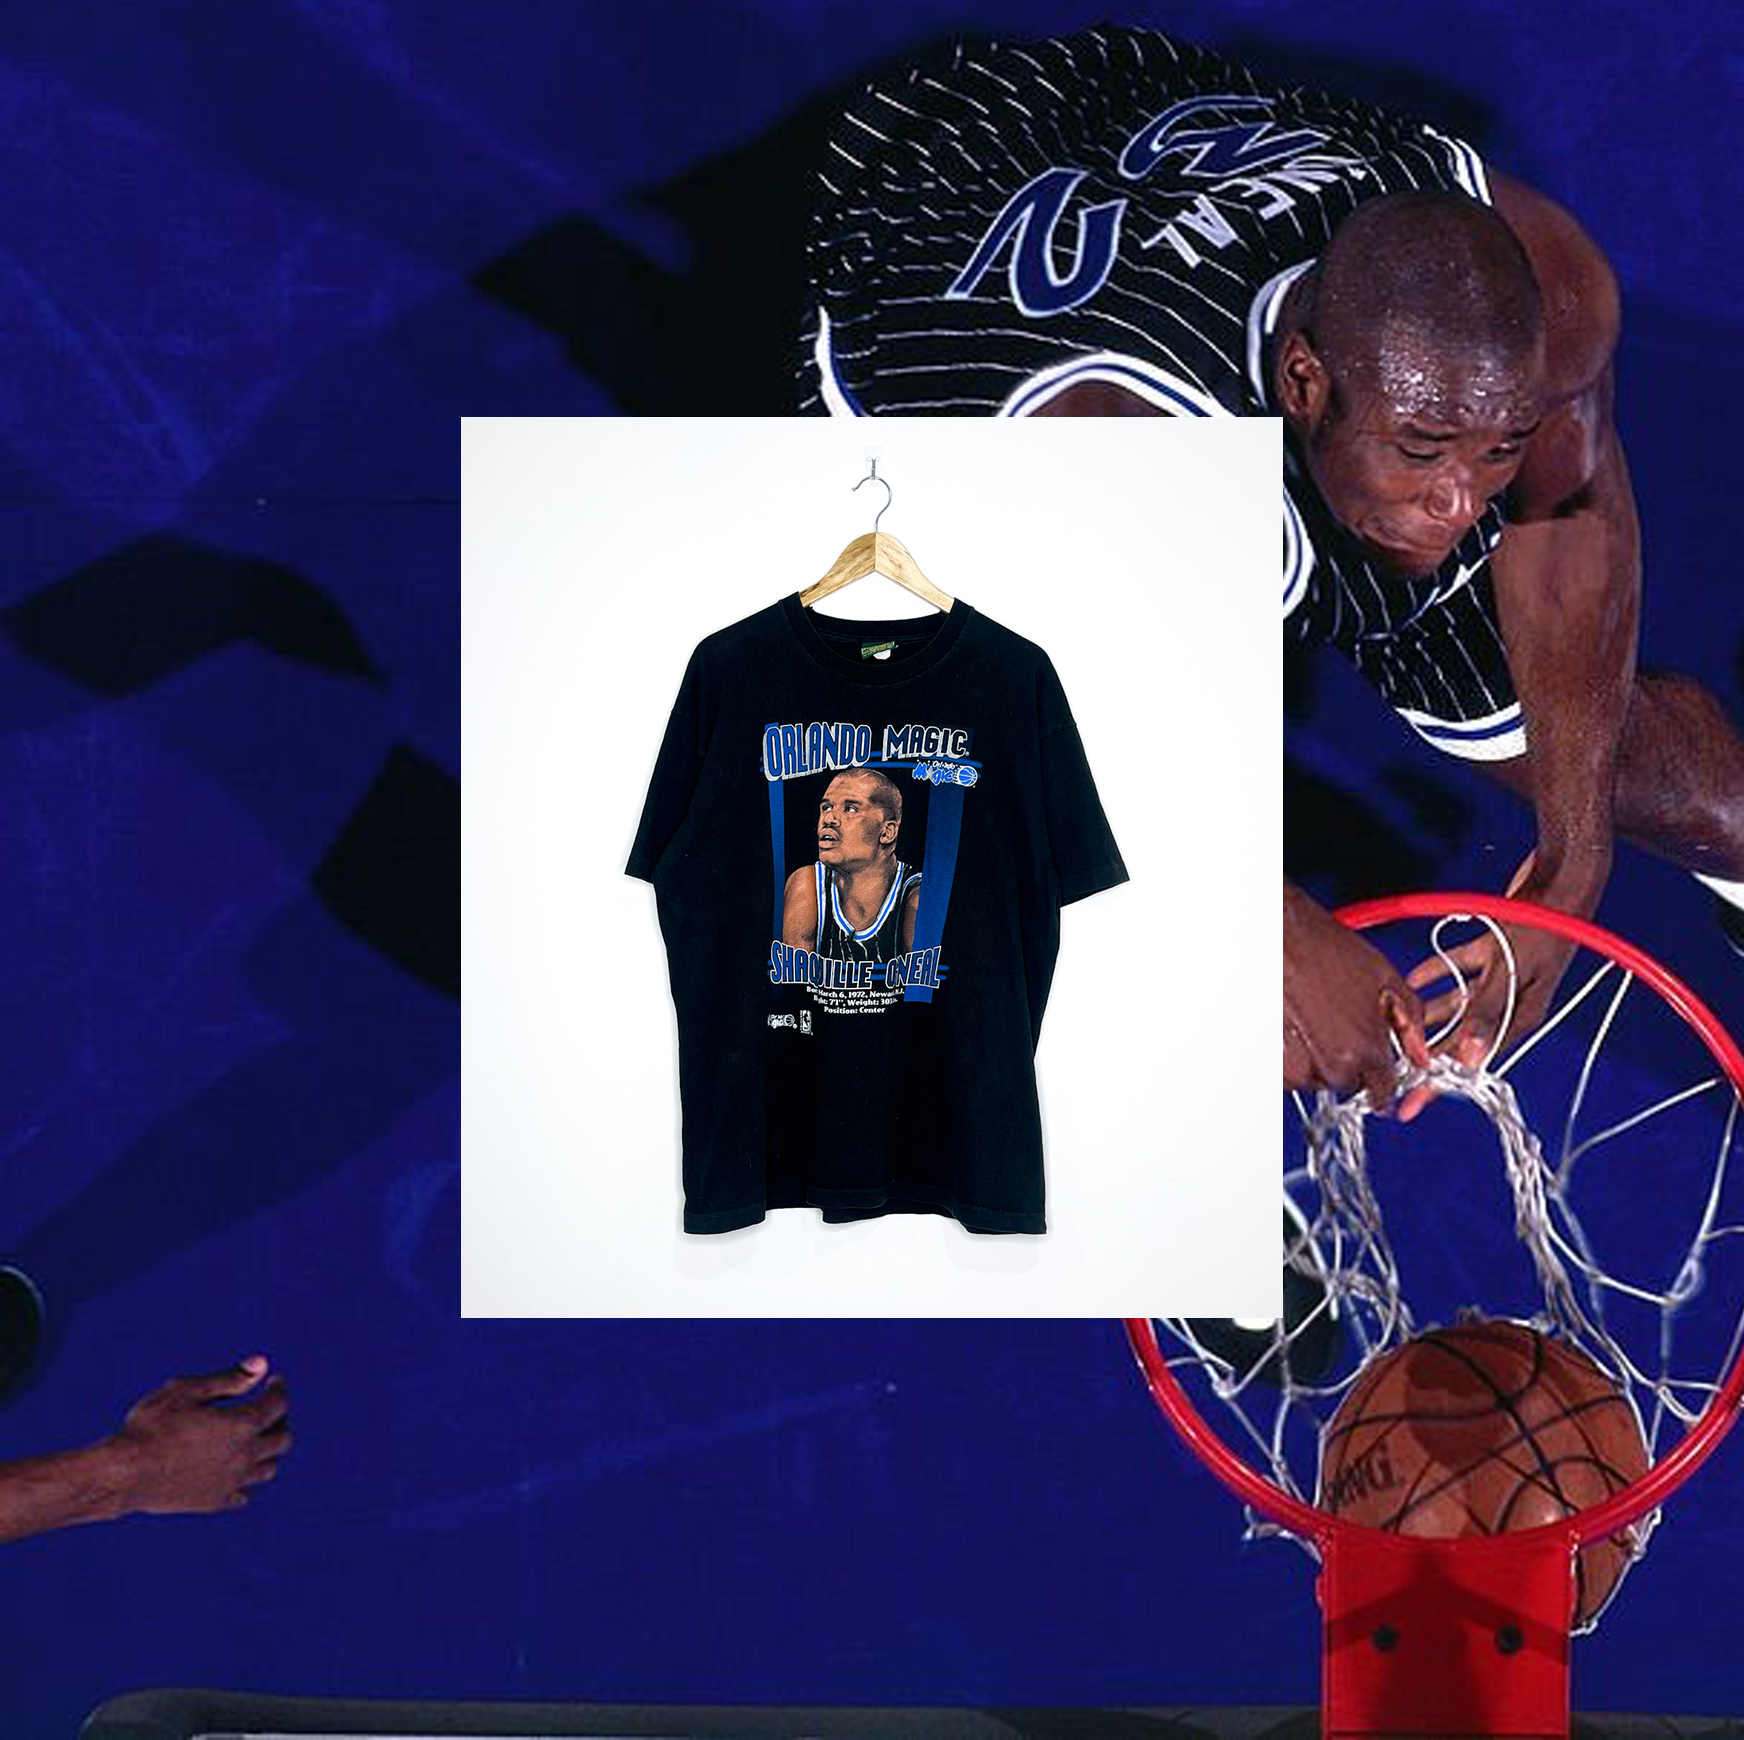 ORLANDO MAGIC "Shaquille O'Neal" VINTAGE PLAYER TEE